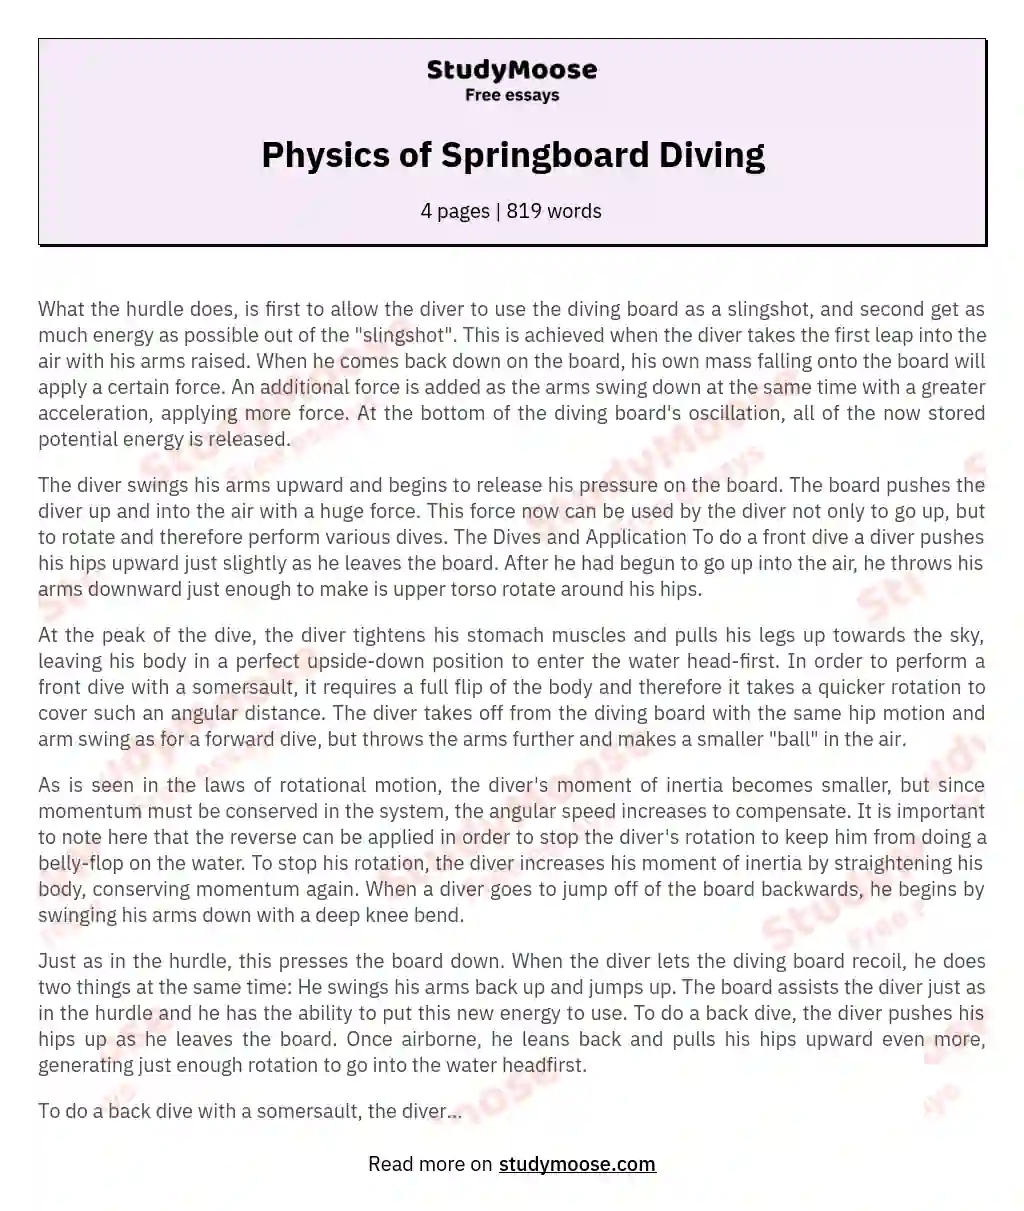 Physics of Springboard Diving essay